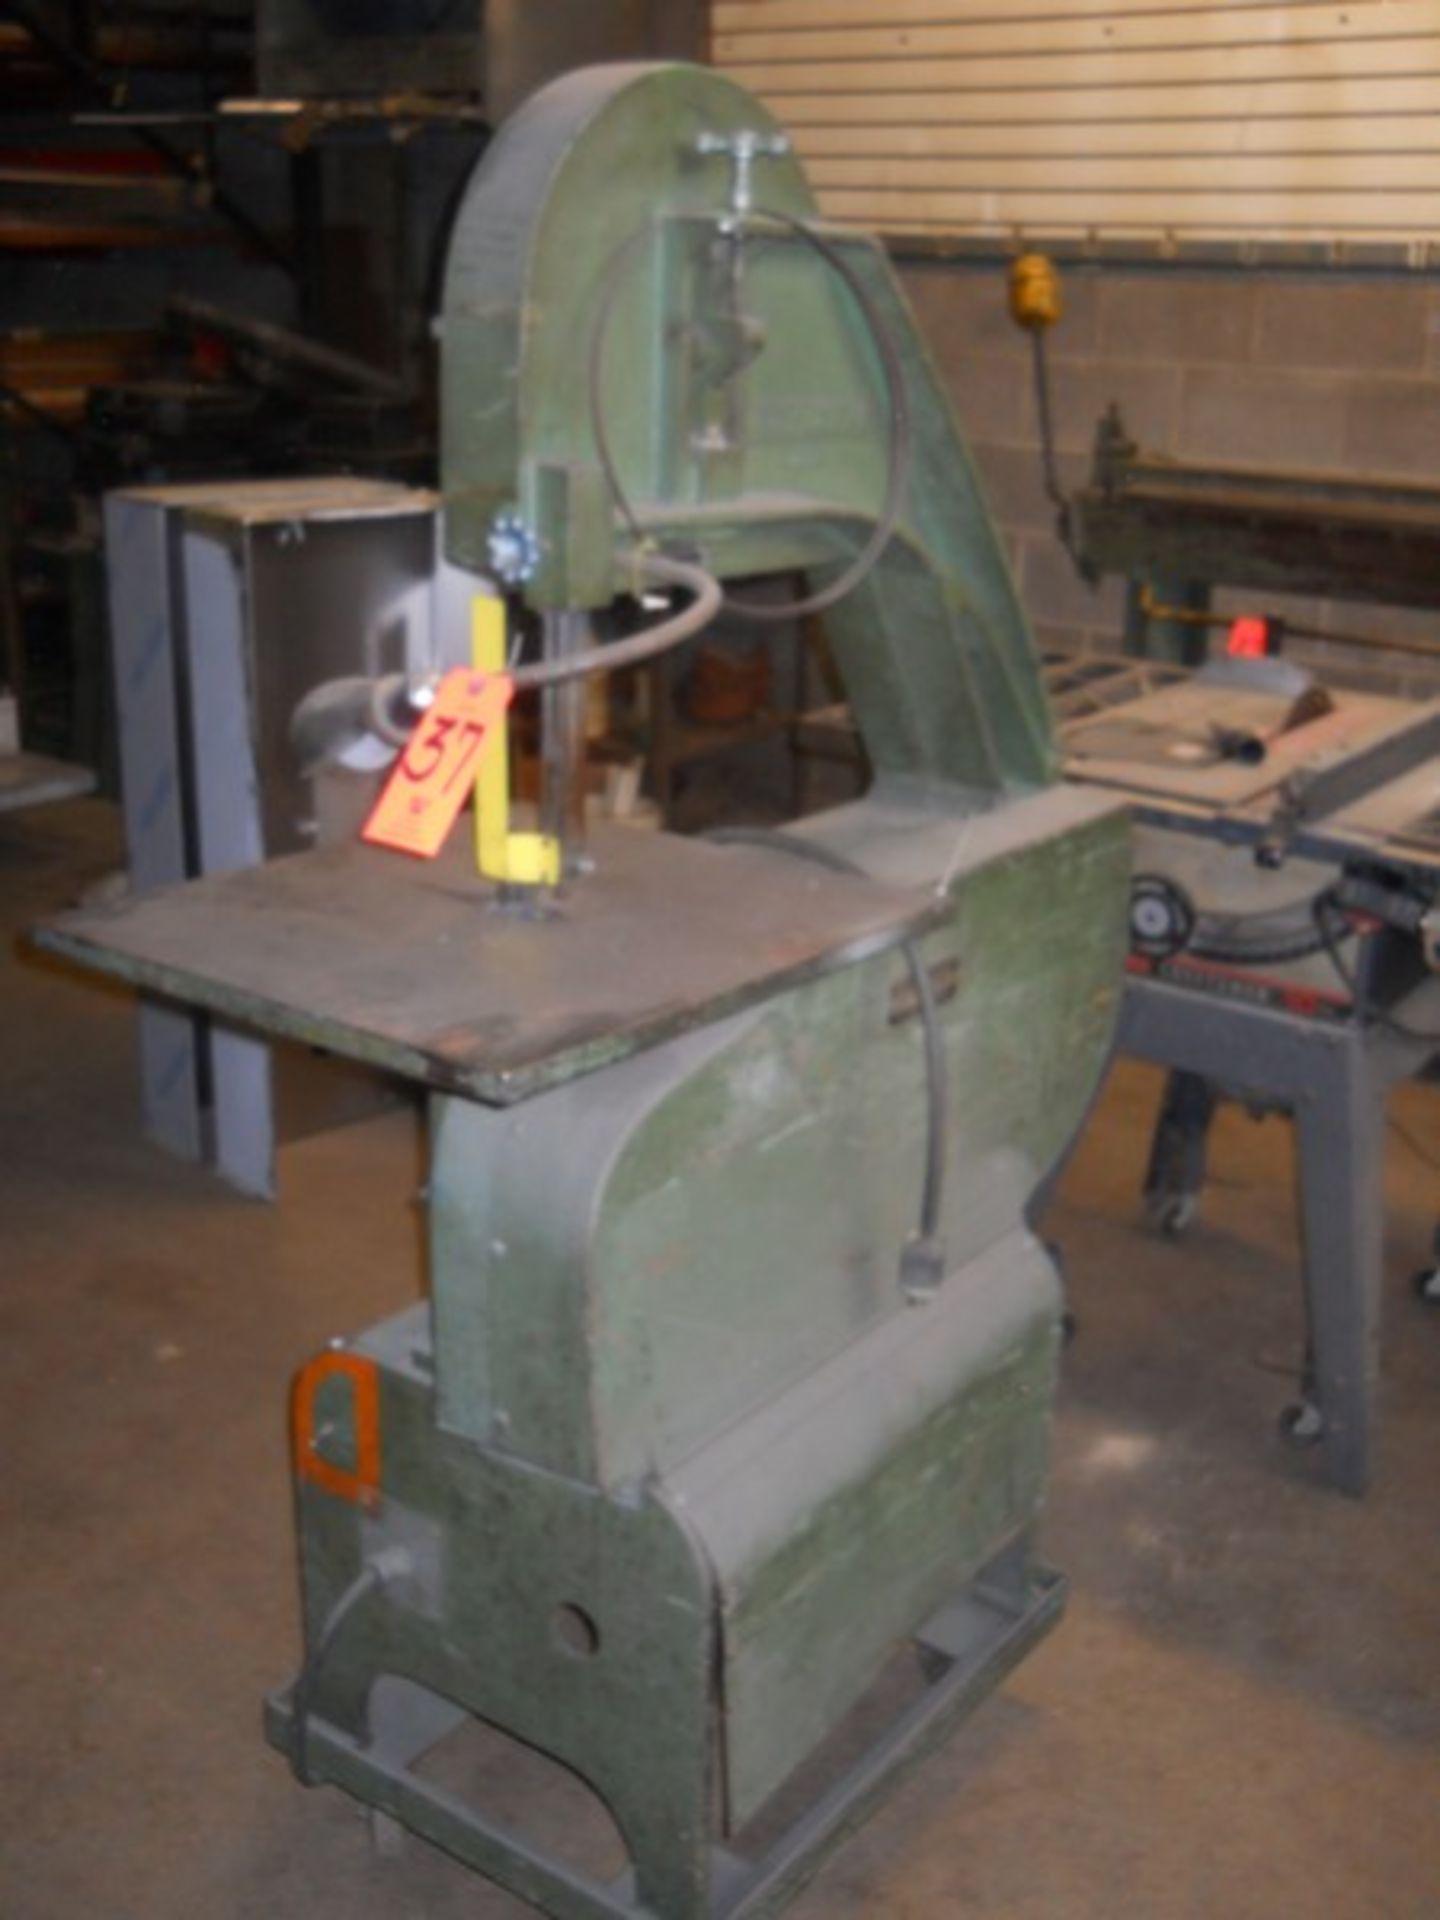 Lockformer Model 24-S Bett-Marr Vertical Band Saw, S/N: 3211; with 24 in. Throat, on Portable Stand - Image 5 of 7